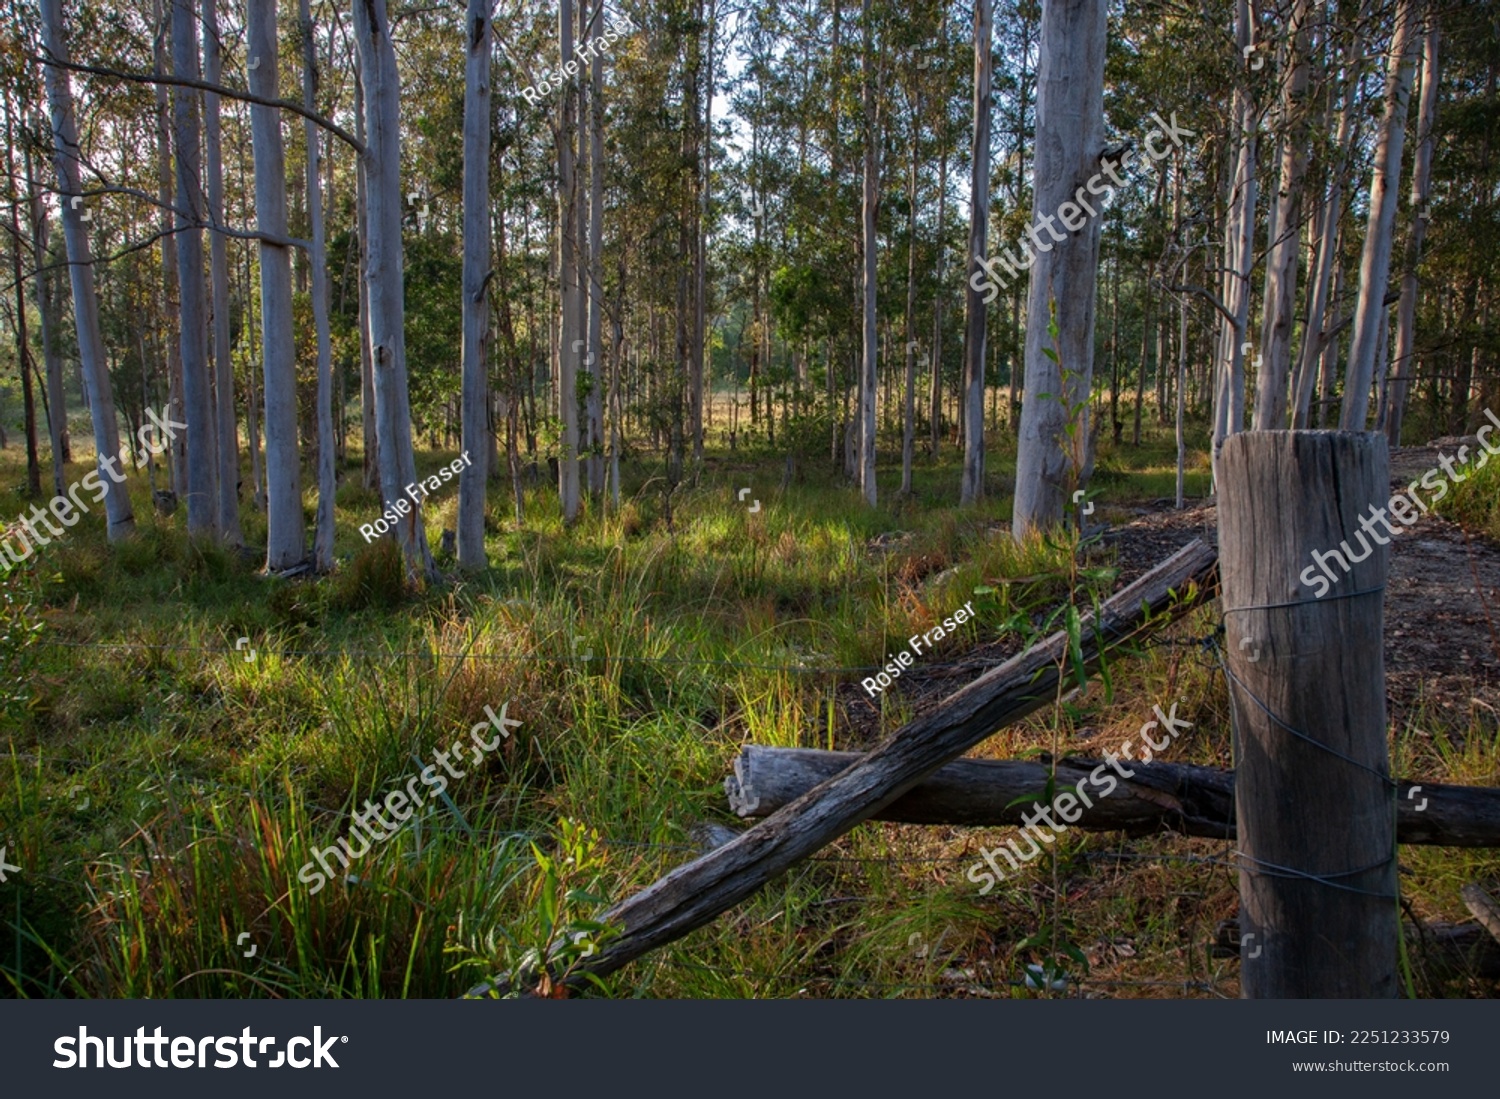 A photo of the countryside taken early one morning in rural New South Wales, Australia, showing an old fence in the foreground with the early morning sun shining weakly through the tall gum trees.  #2251233579